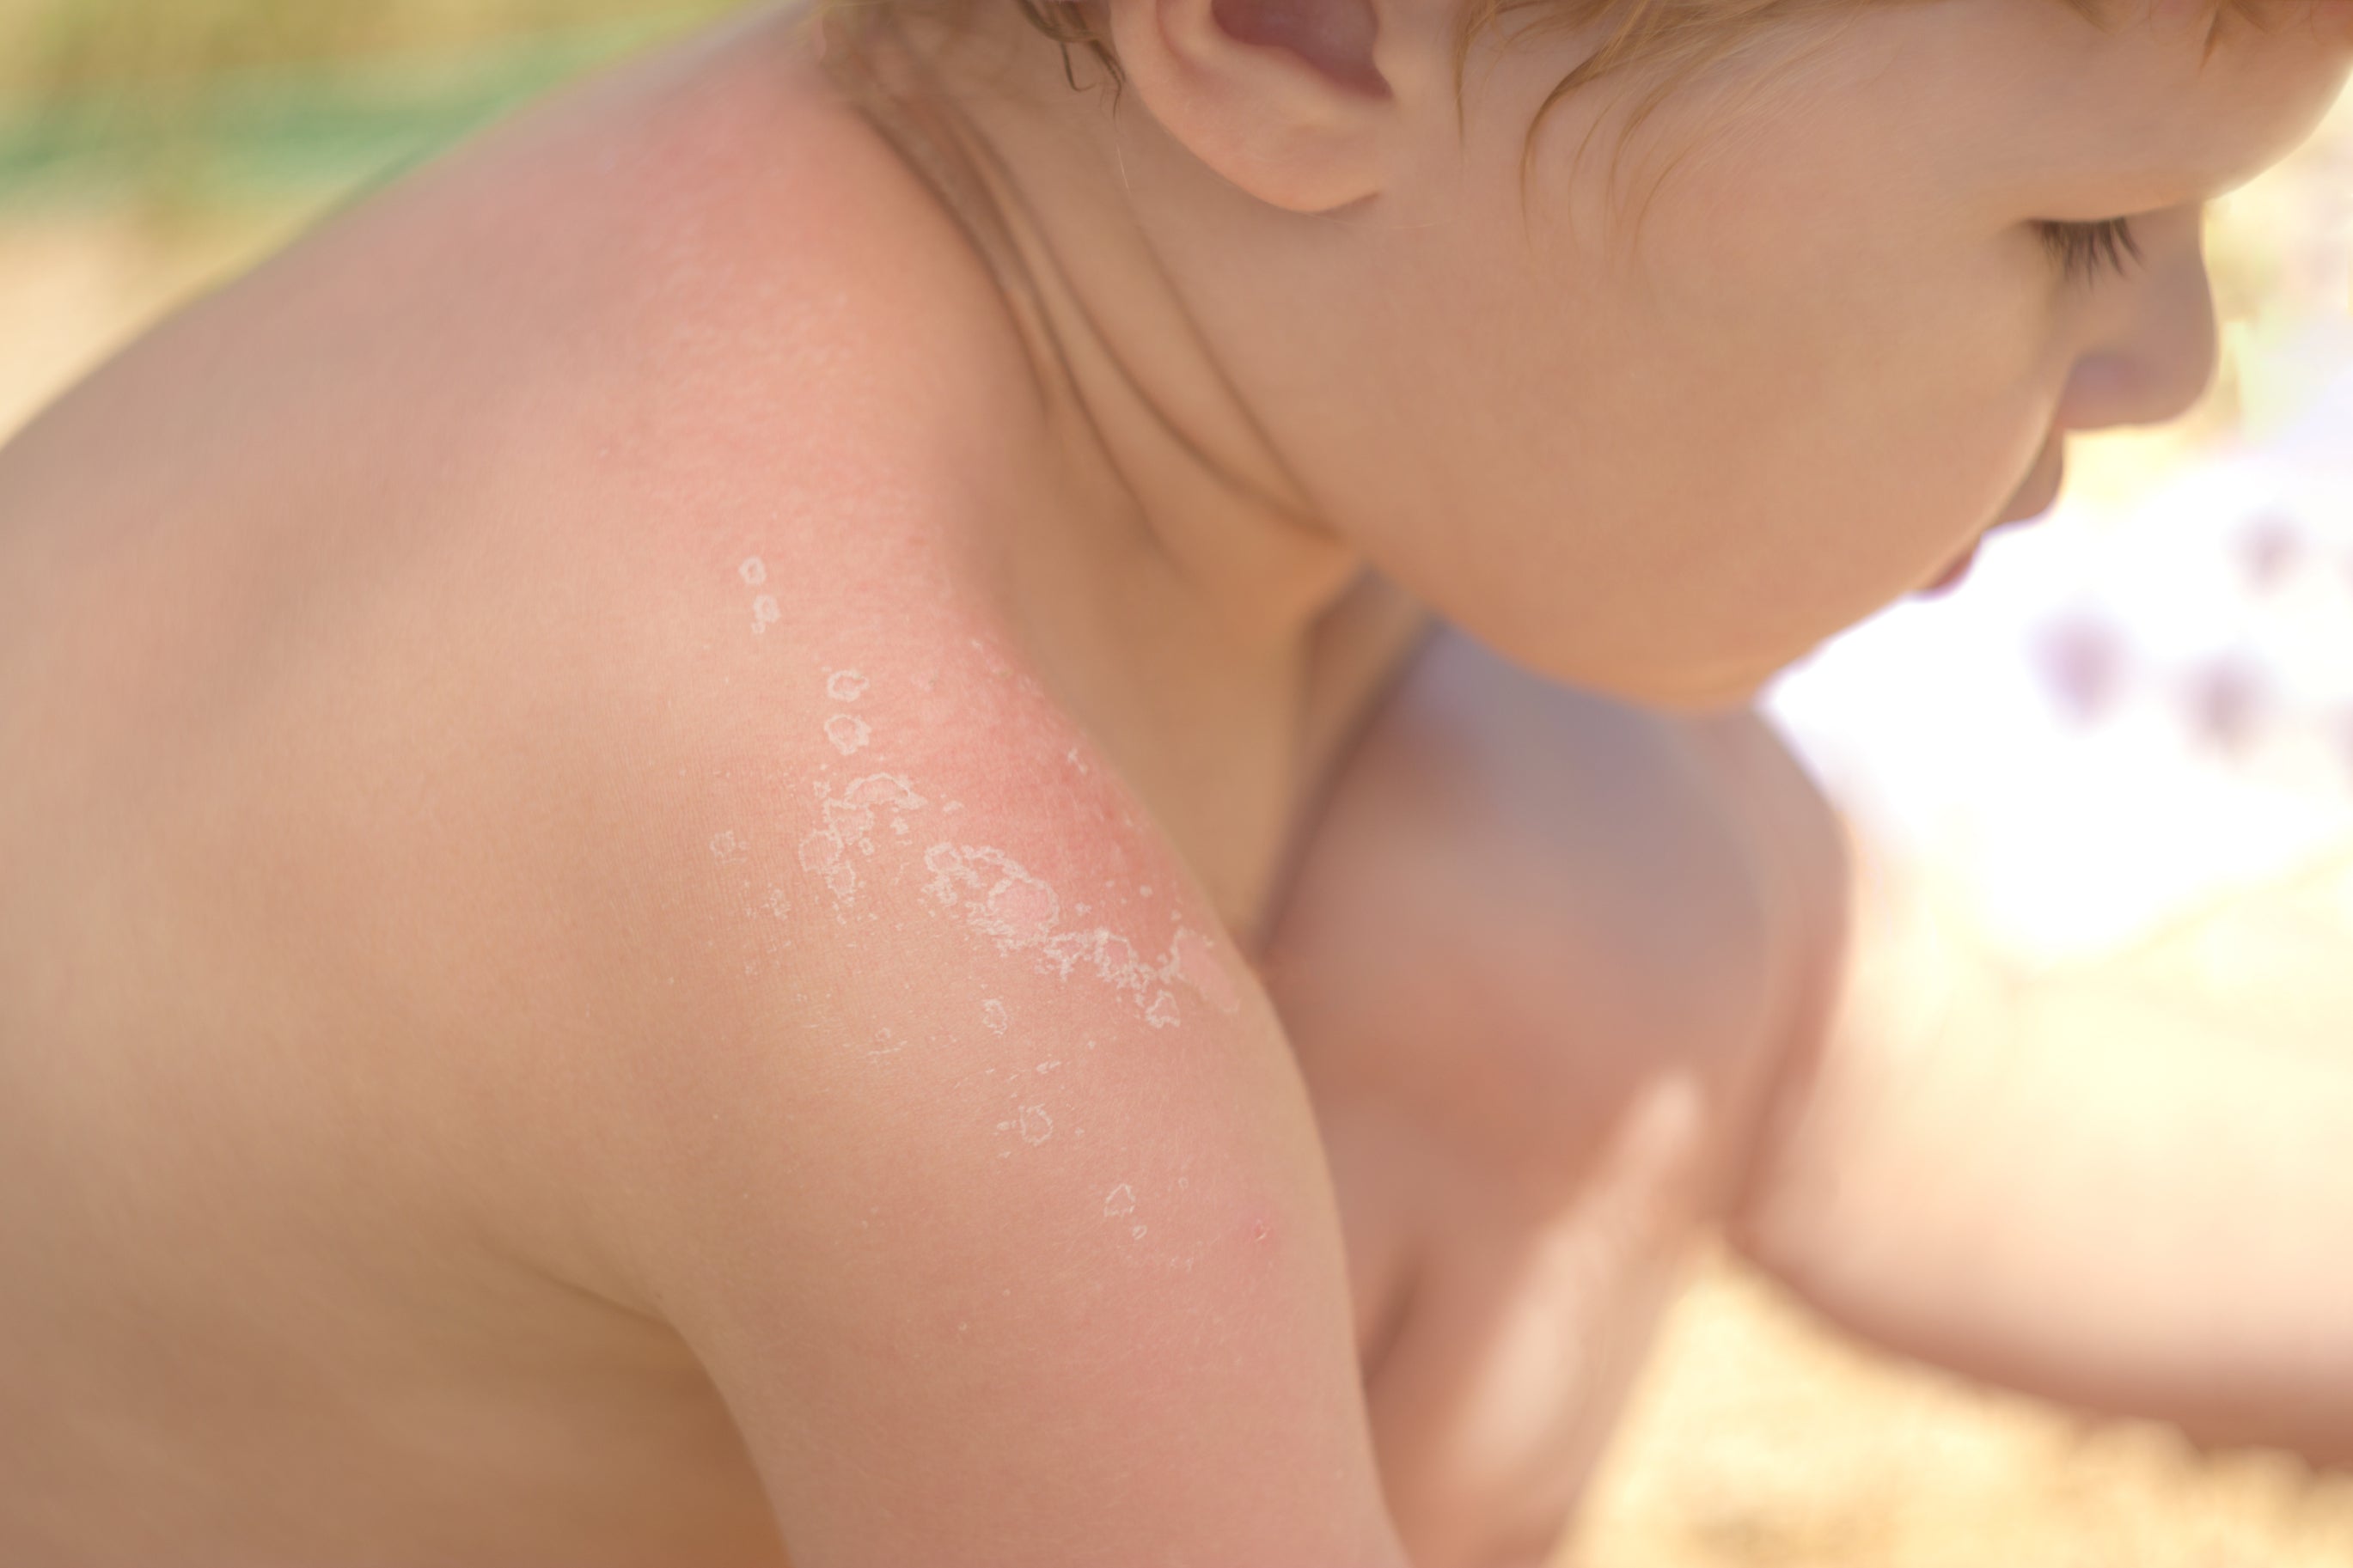 A toddler with a sunburn on his shoulder that is peeling. Shea butter can provide relief to sunburned skin in babies and children.